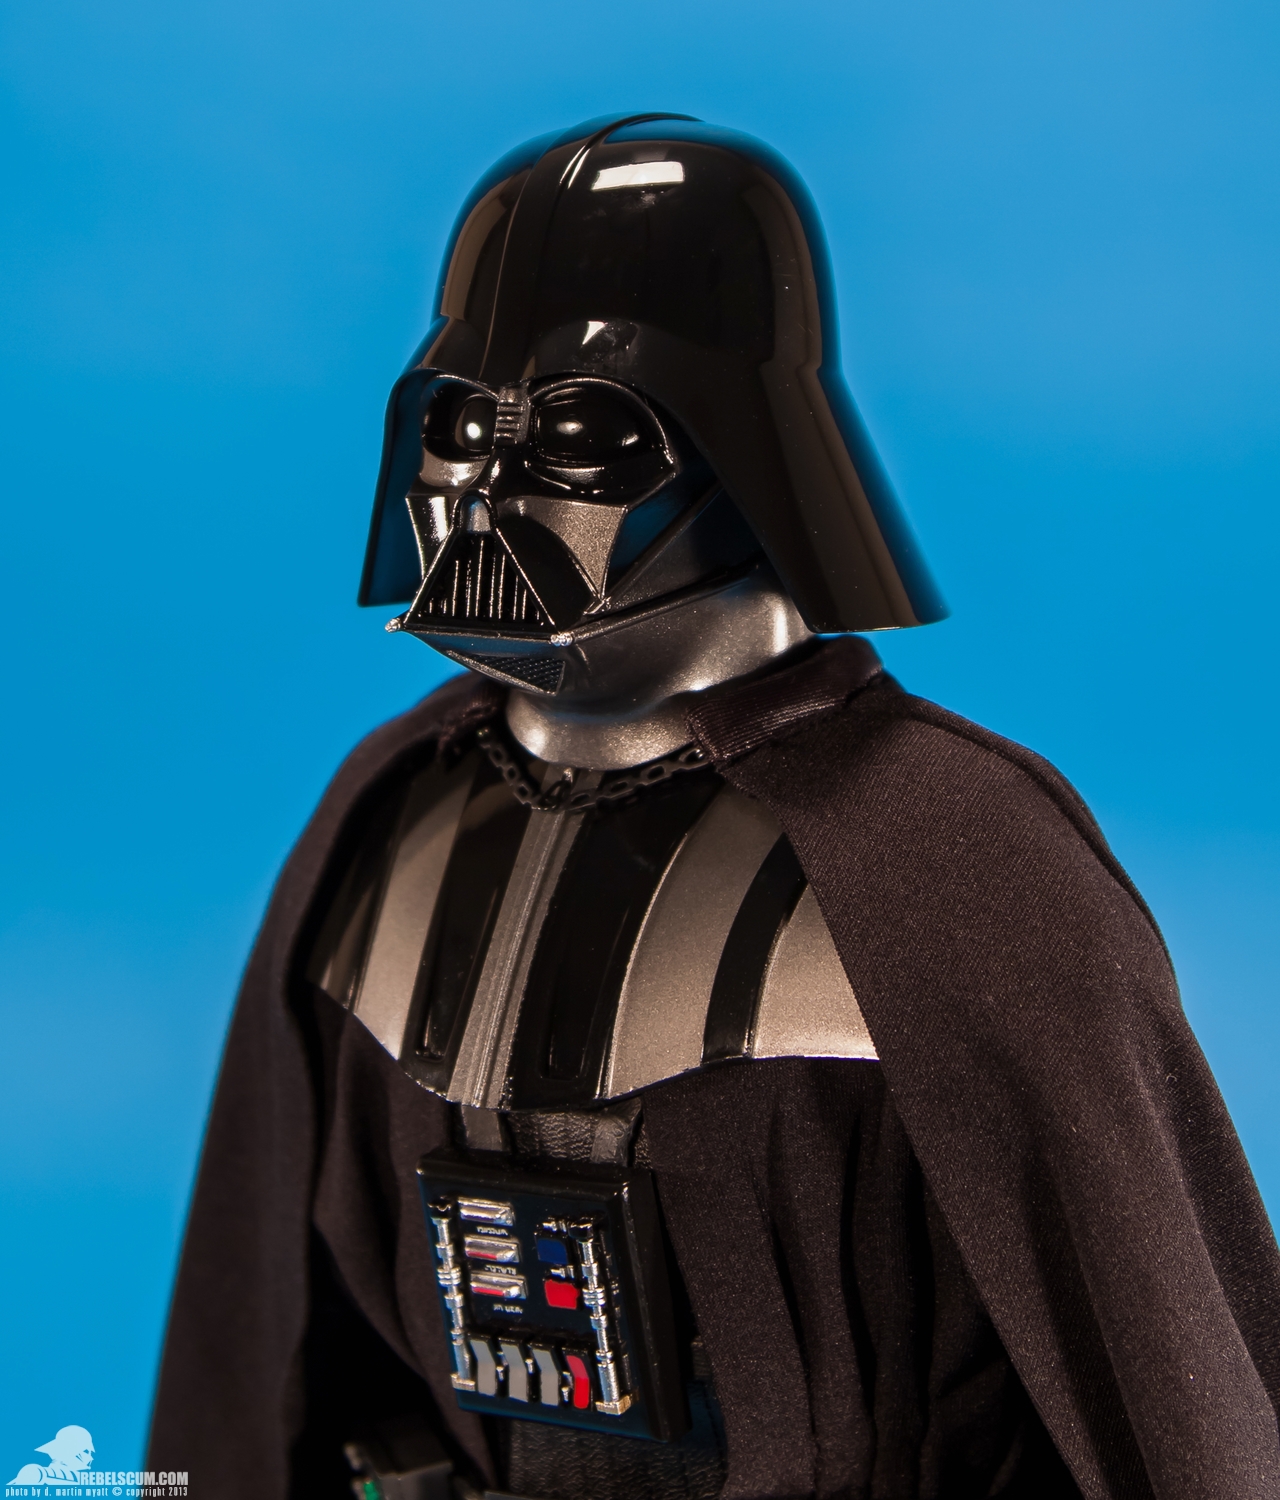 Darth-Vader-Return-Of-The-Jedi-Sixth-Scale-Sideshow-Collectibles-007.jpg